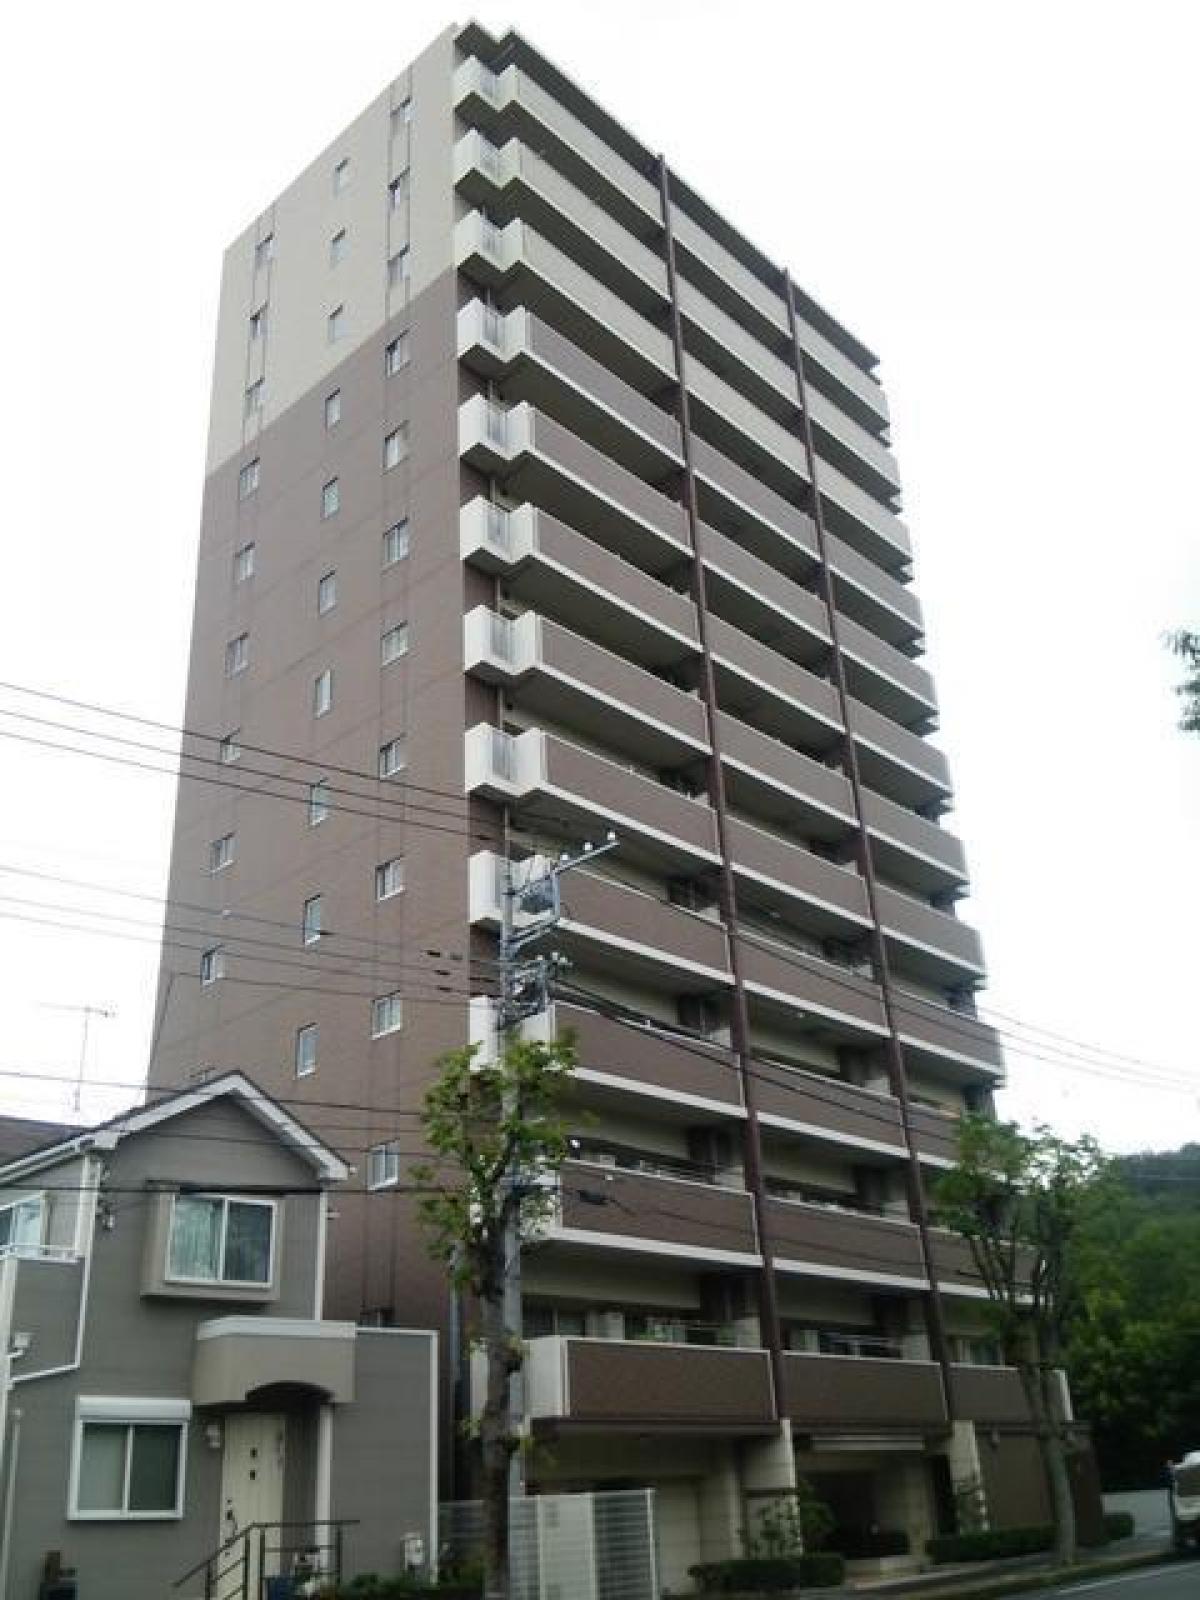 Picture of Apartment For Sale in Zama Shi, Kanagawa, Japan